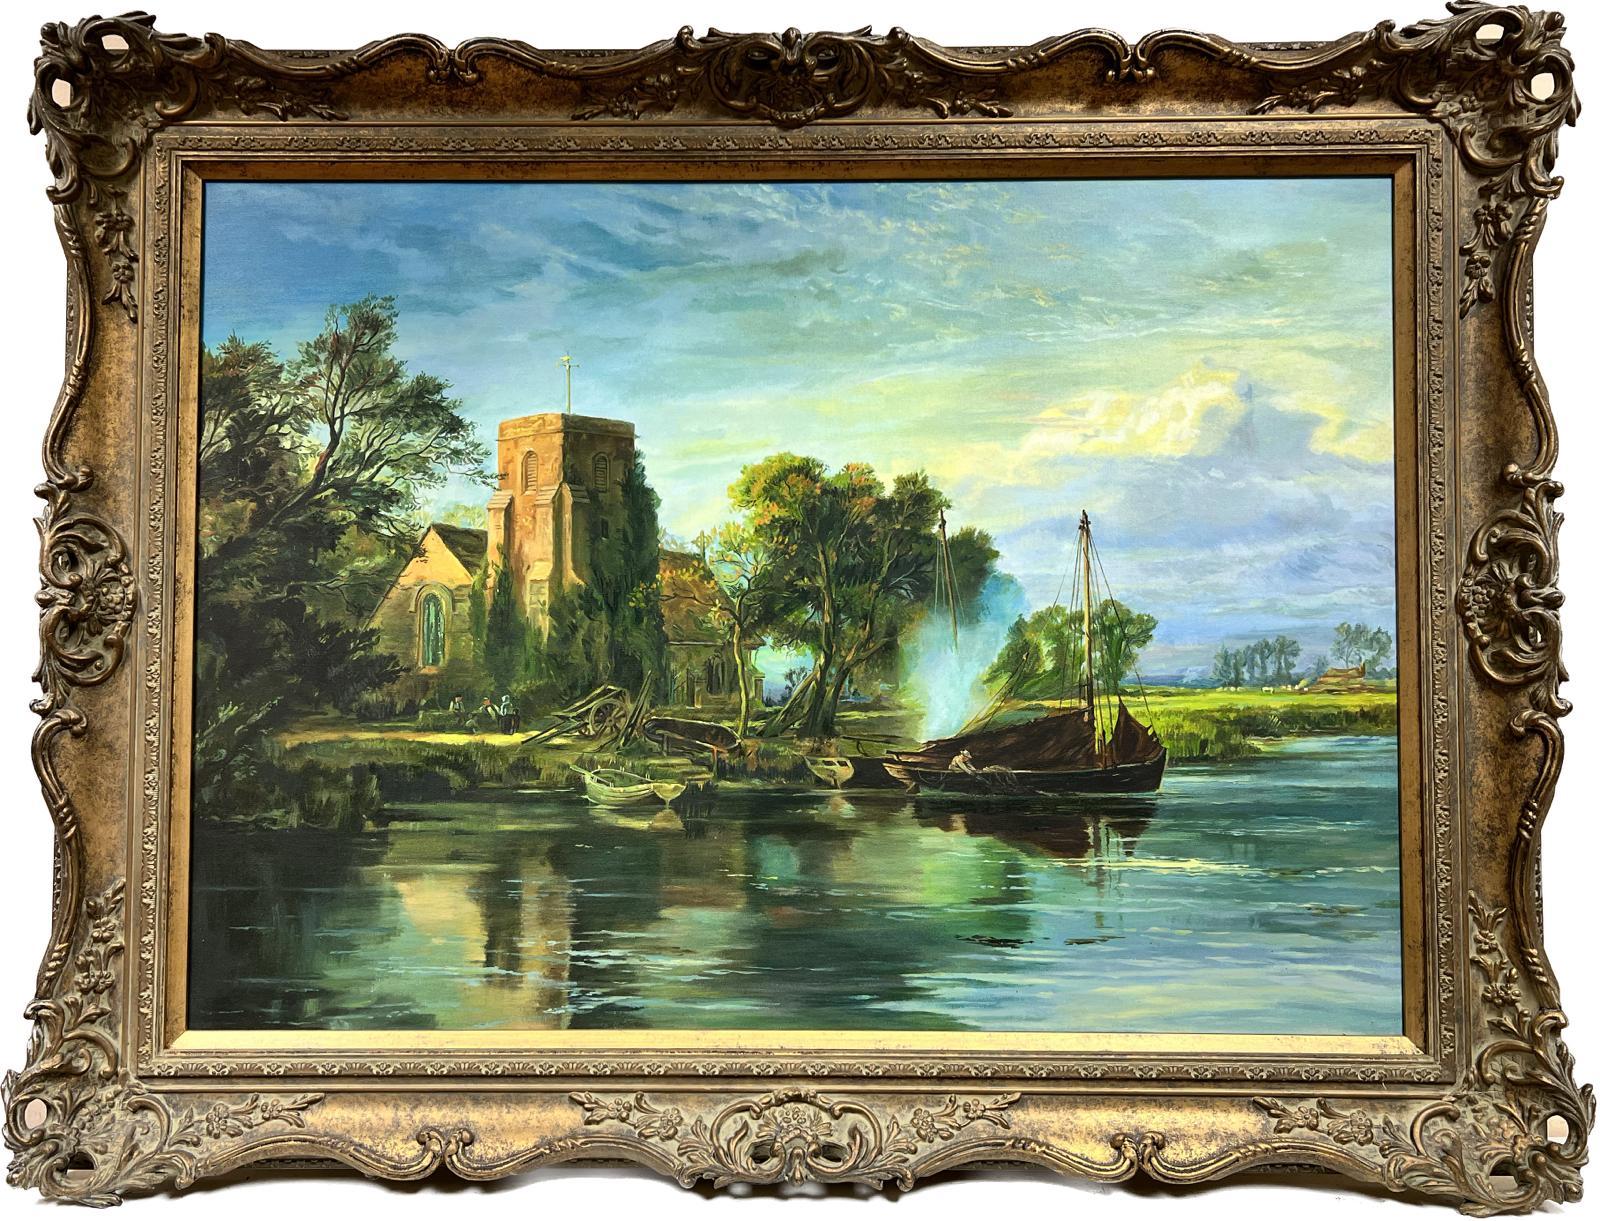 Dutch School Landscape Painting - Large Framed Oil Painting River Landscape Ferry Boats Old Church Abbey Buildings